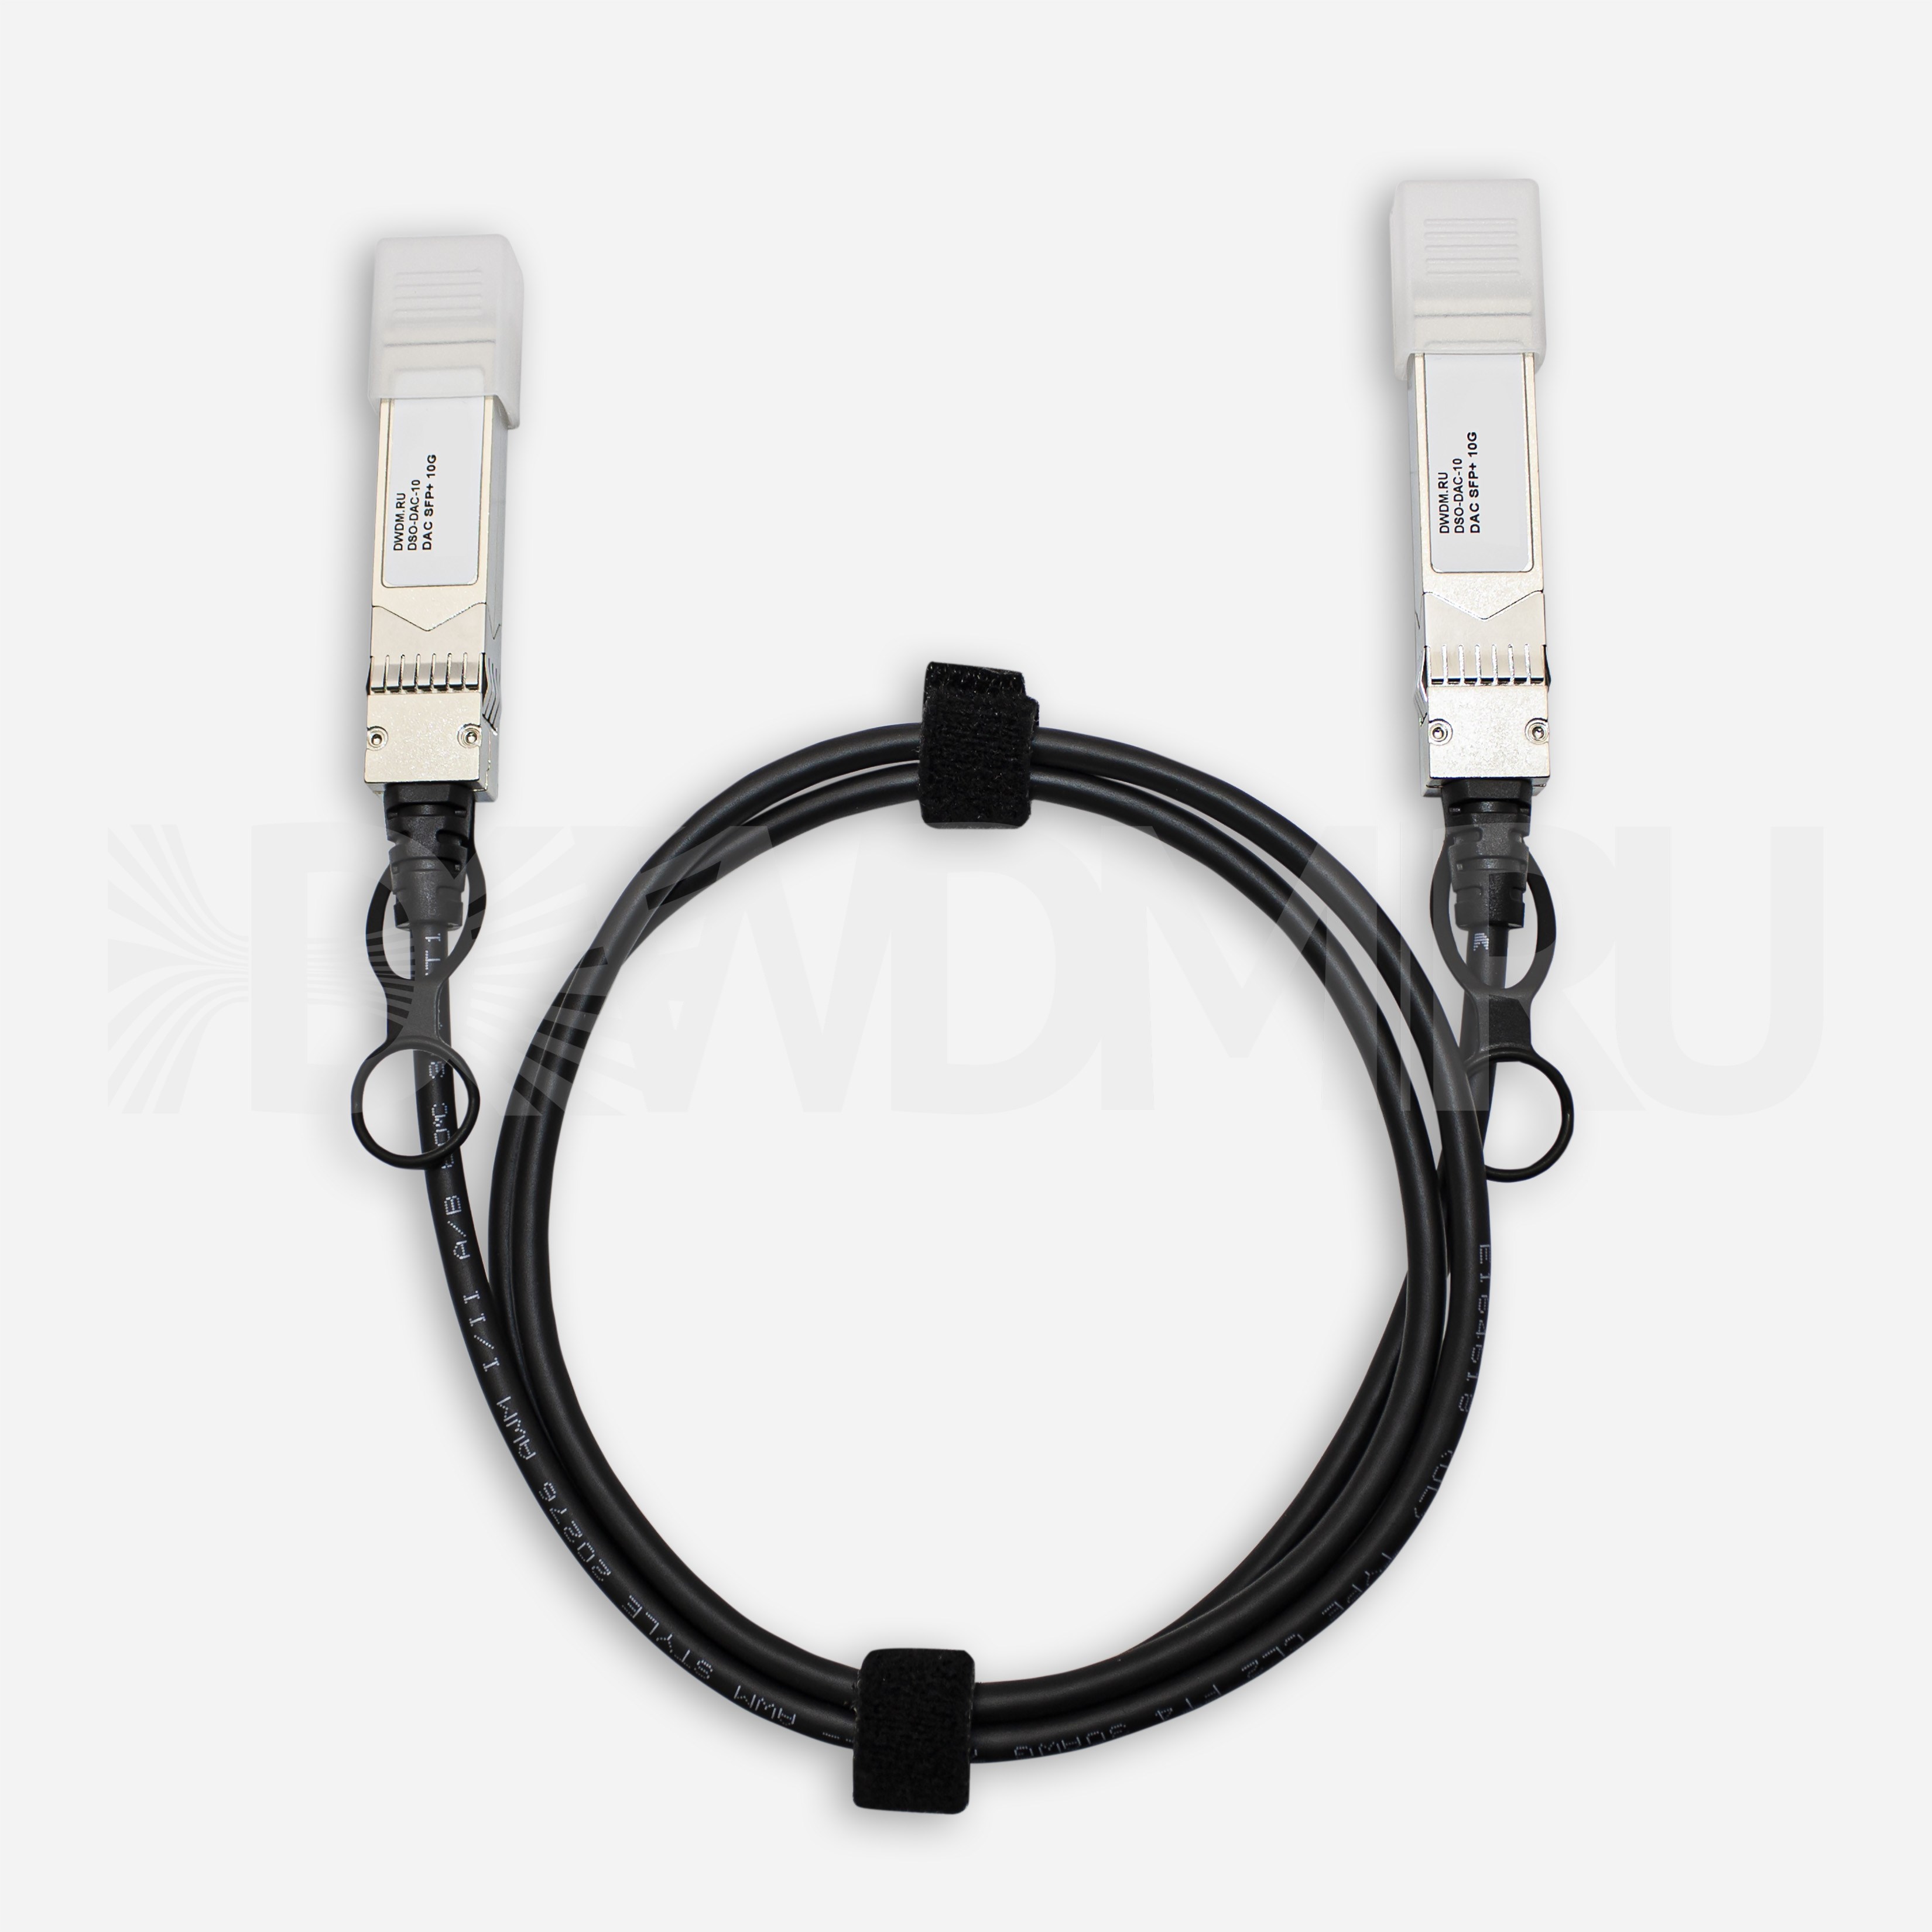 Кабель Direct Attached, SFP+, 30AWG, 10 Гб/с, 1 м - ДВДМ.РУ (DSO-DAC-10-1)